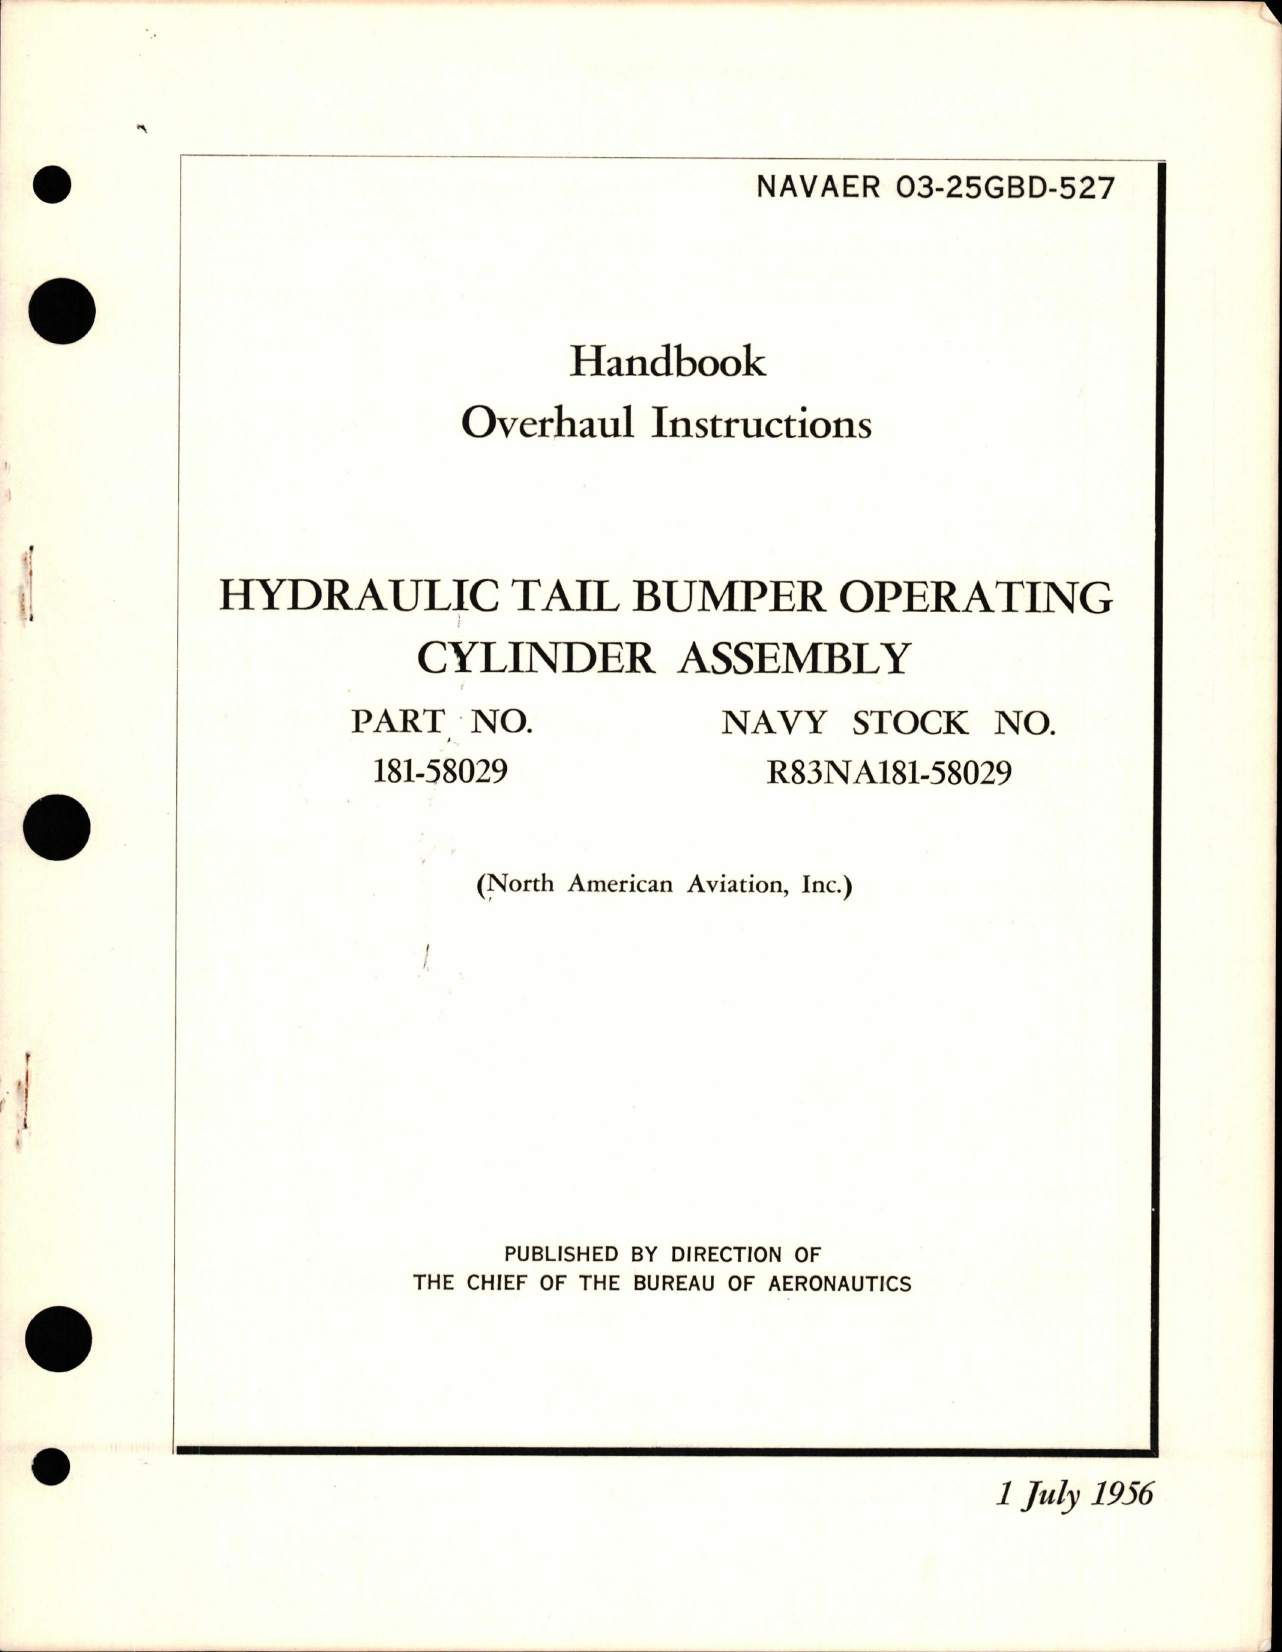 Sample page 1 from AirCorps Library document: Overhaul Instructions for Hydraulic Bumper Operating Cylinder Assembly - Part 181-58029 